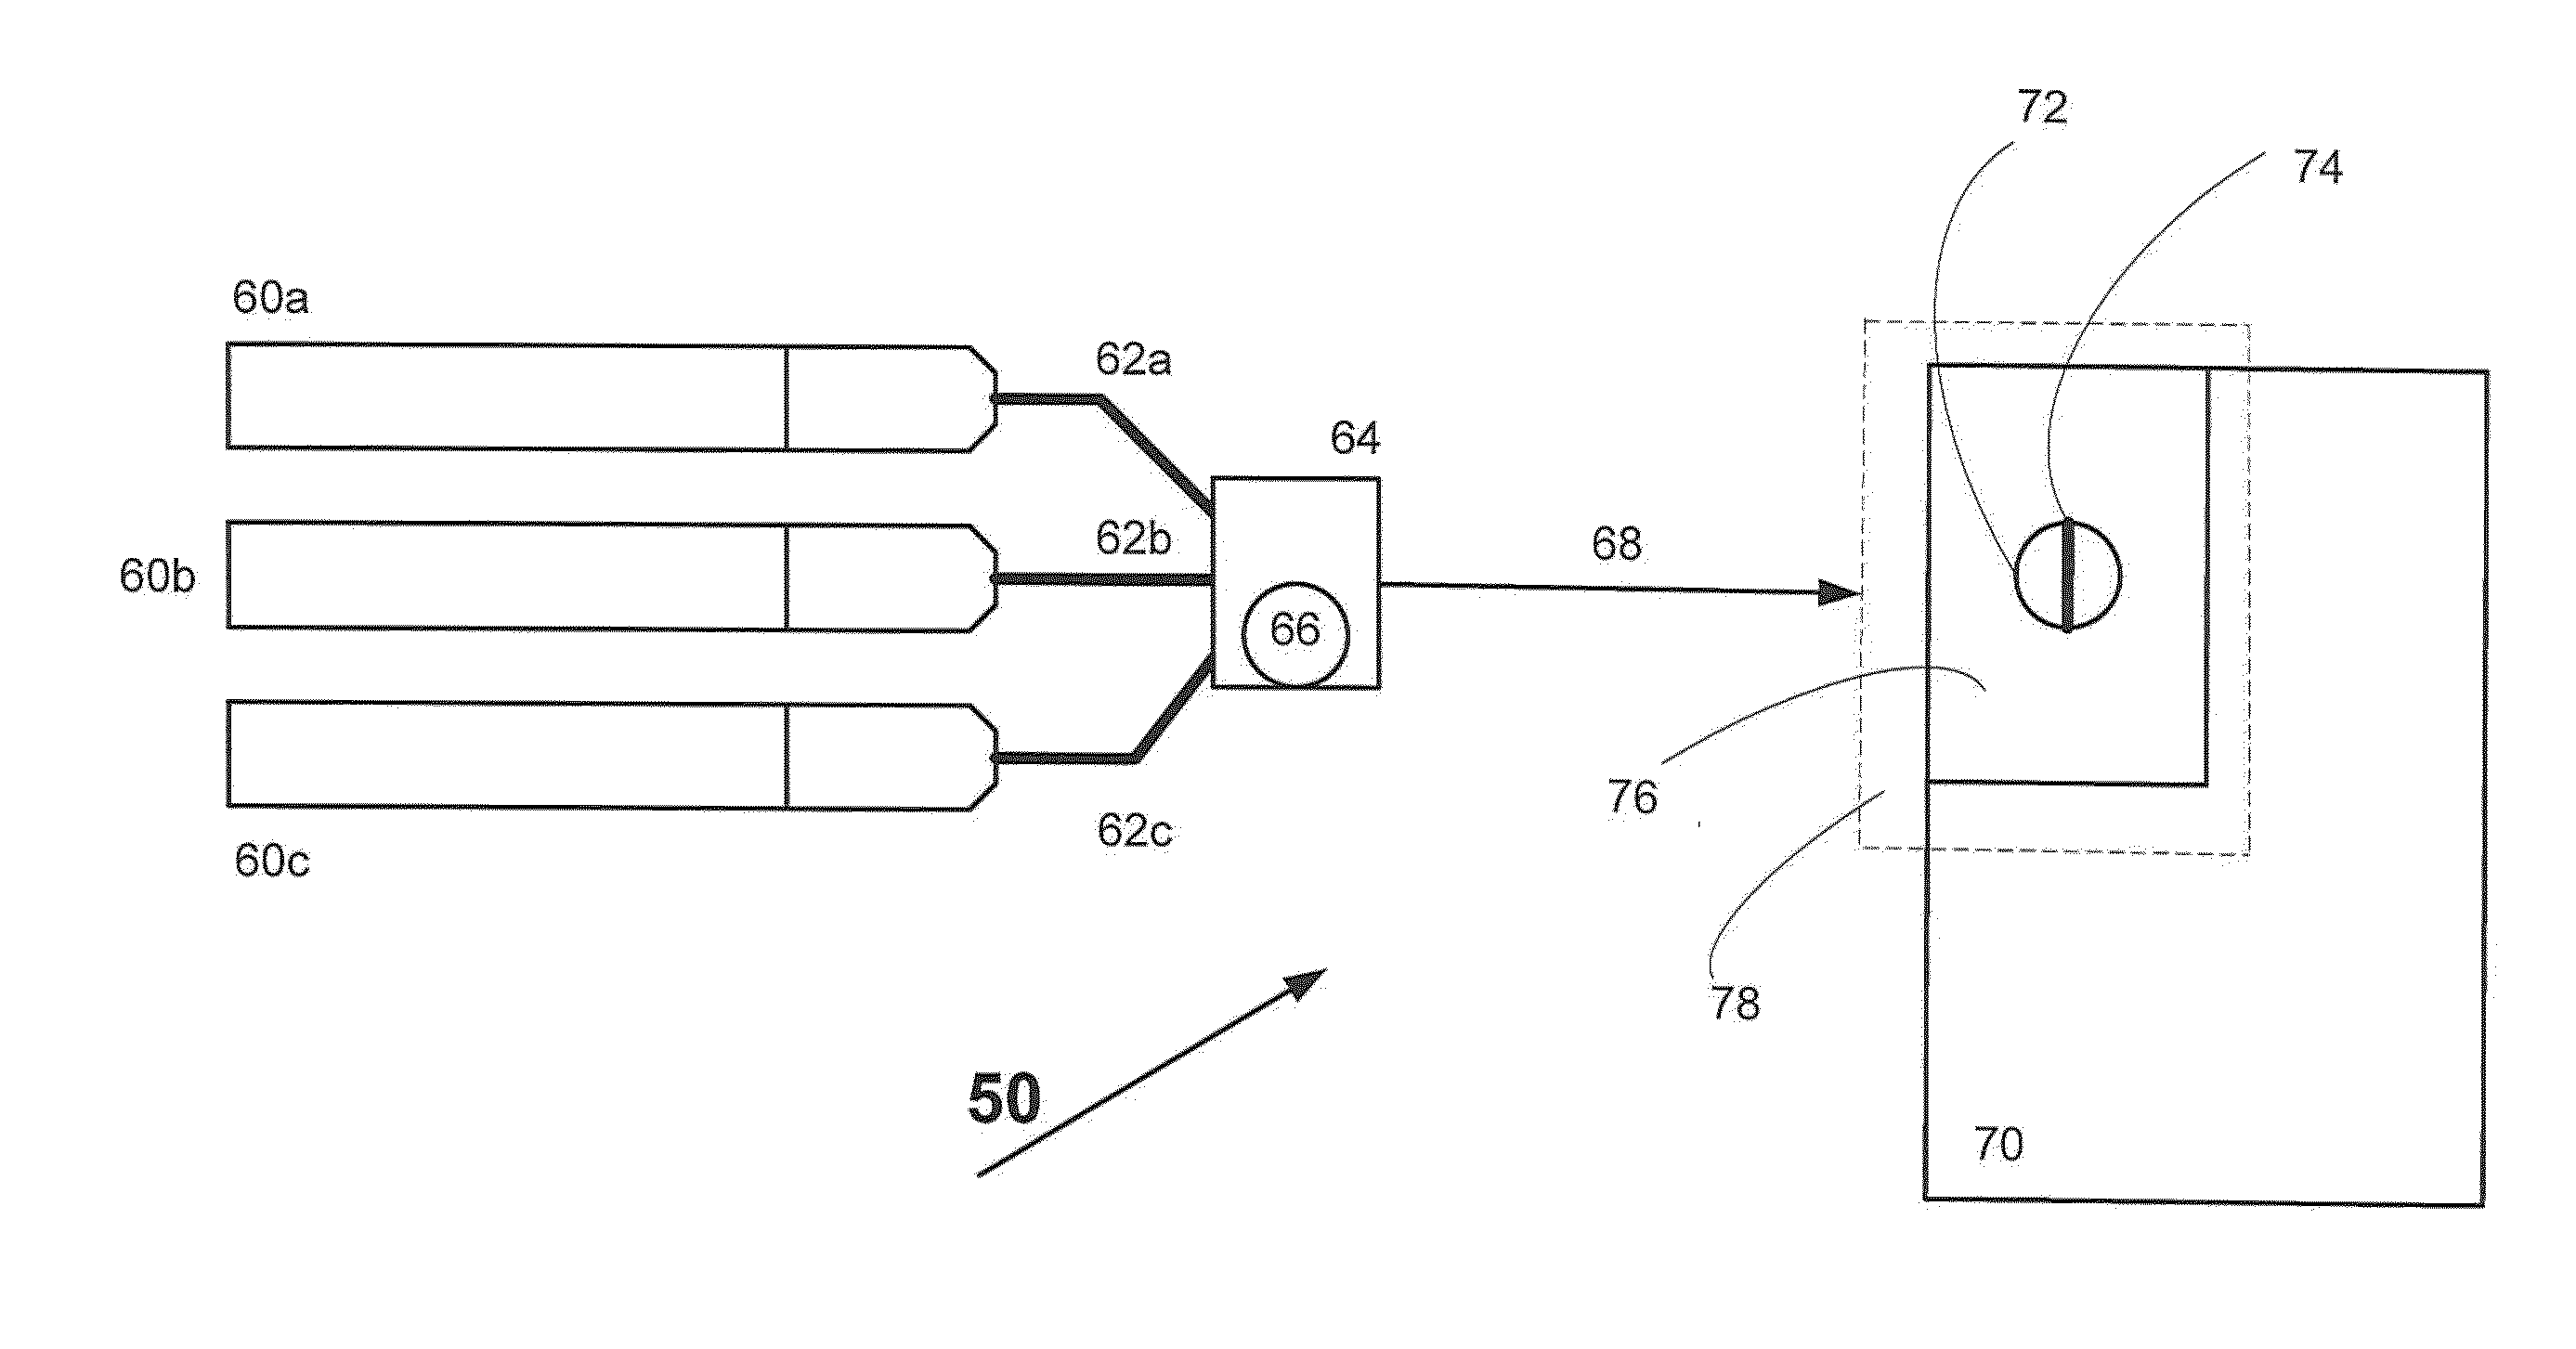 System and Method Utilizing Fiber Lasers for Titanium Welding Using an Argon Cover Gas